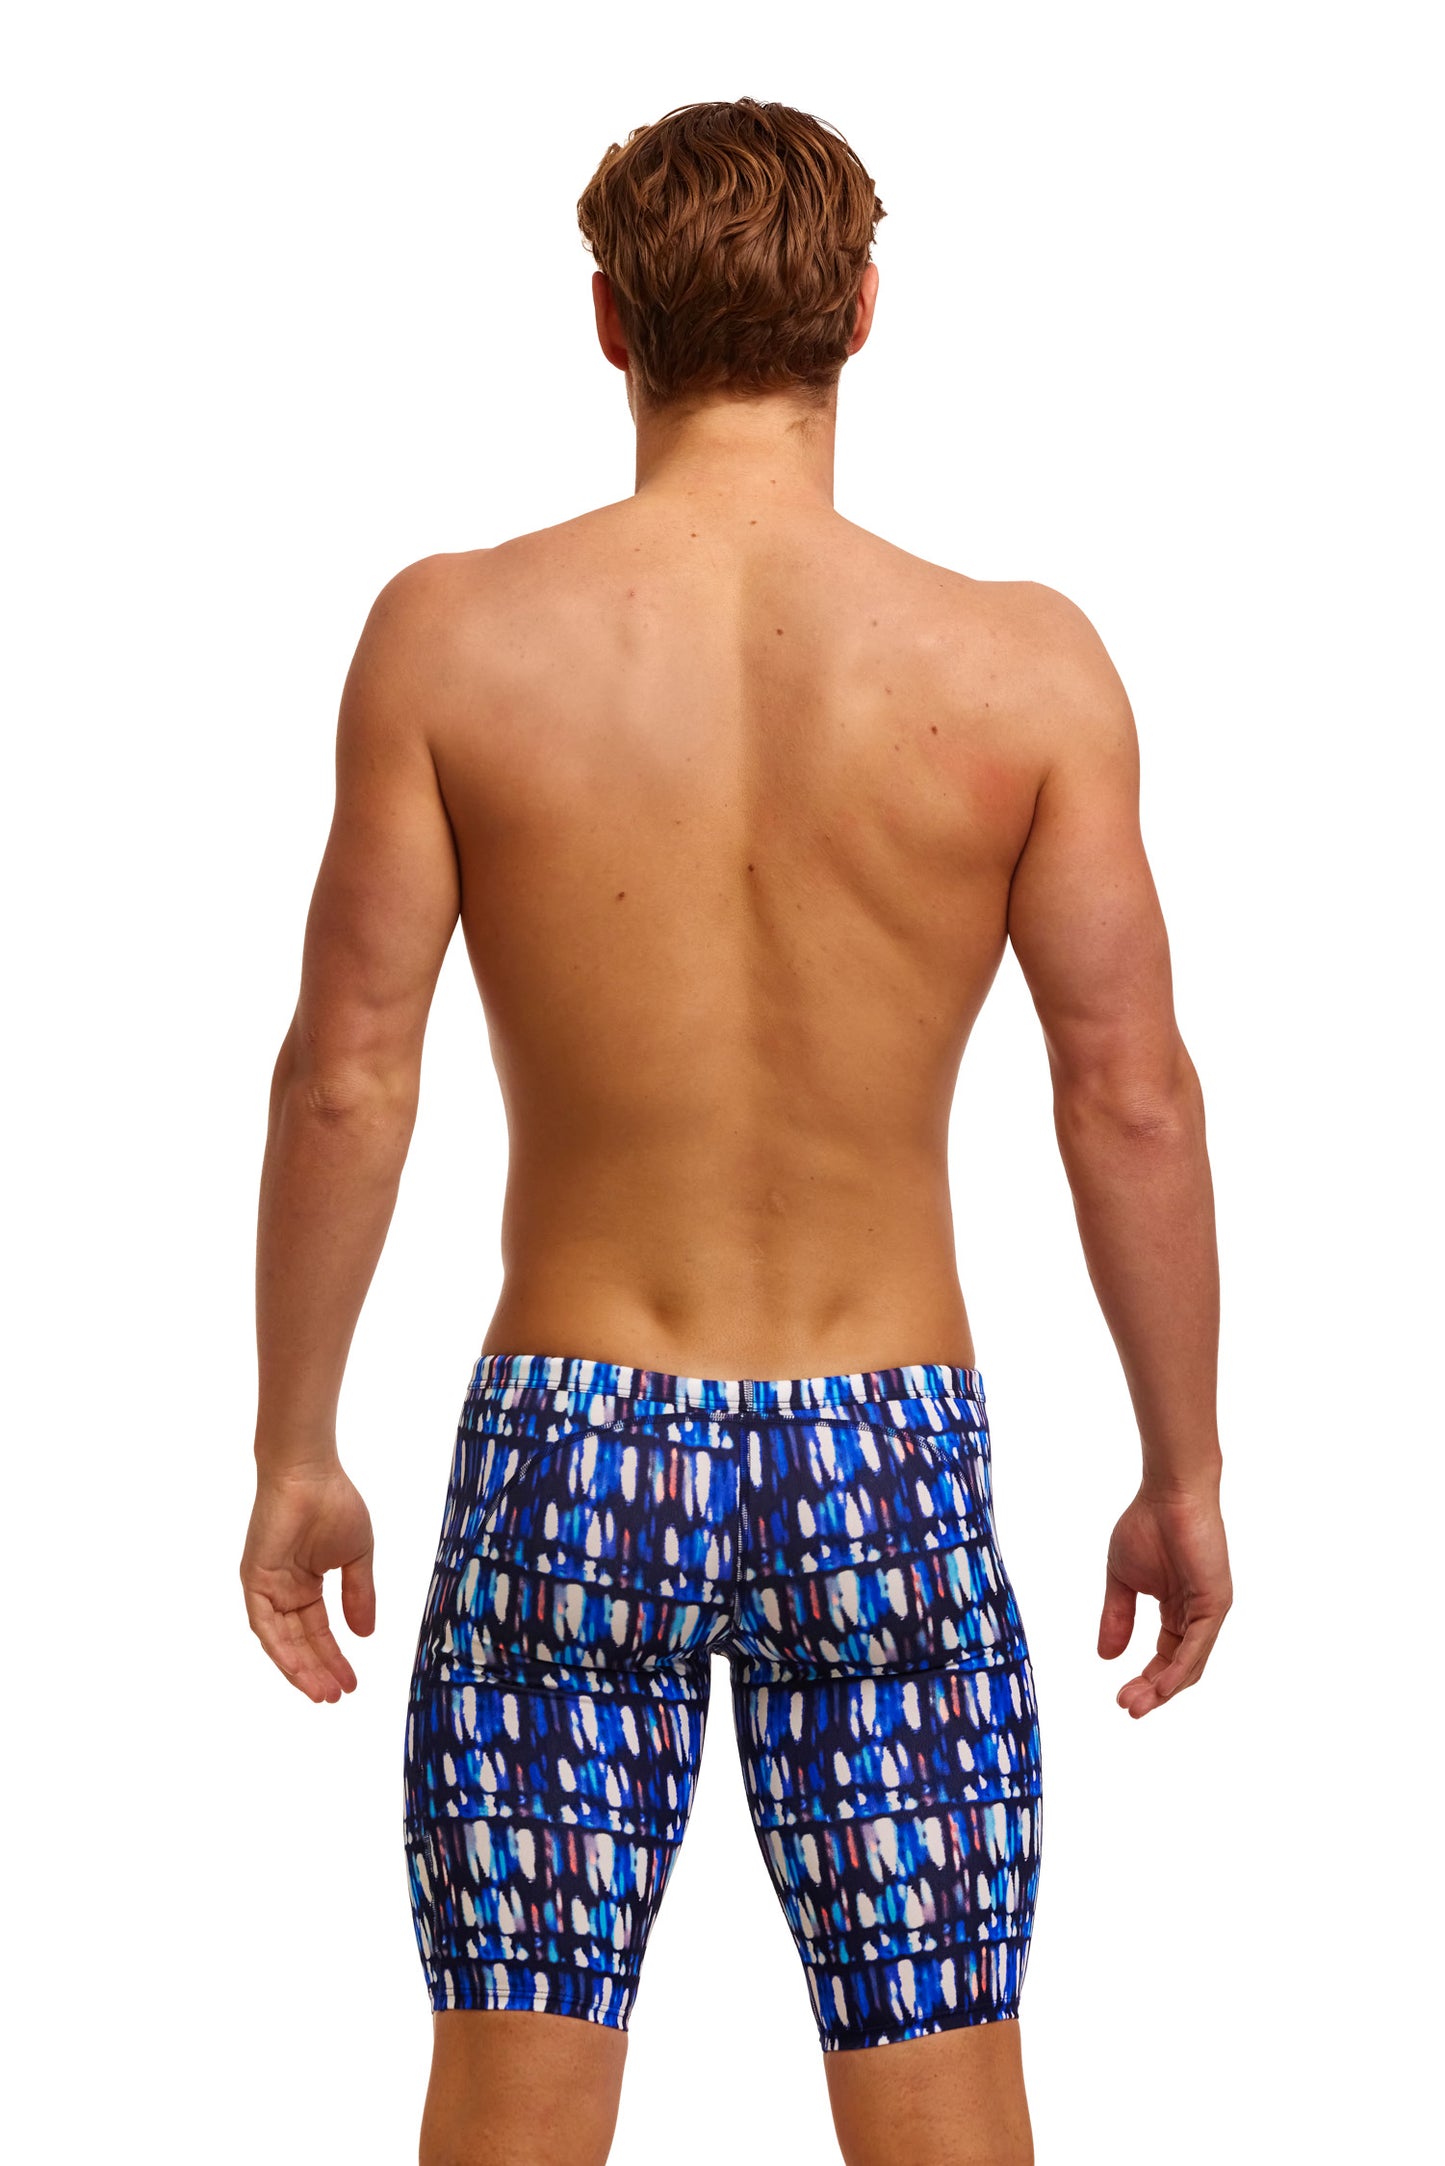 Funky Trunks Mens Training Jammers Perfect Teeth